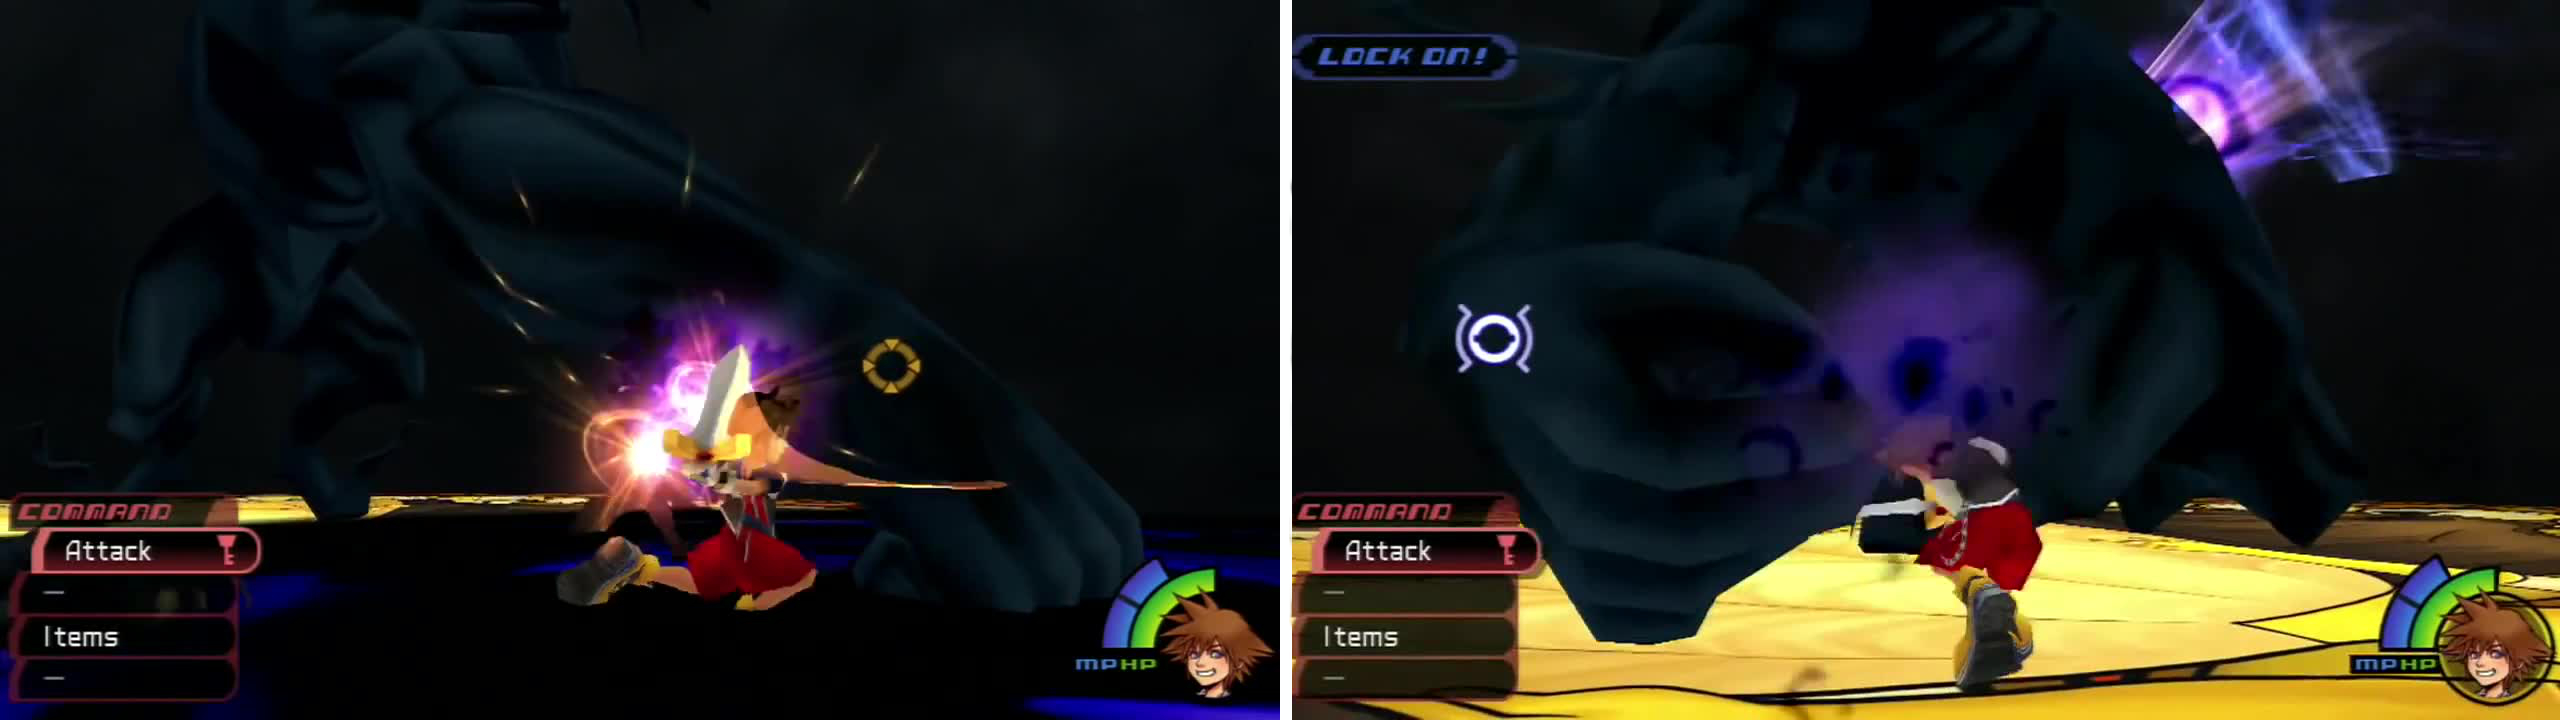 Darkside uses Shadow Summon (right), and crouches down to use Darkness Orb (left).